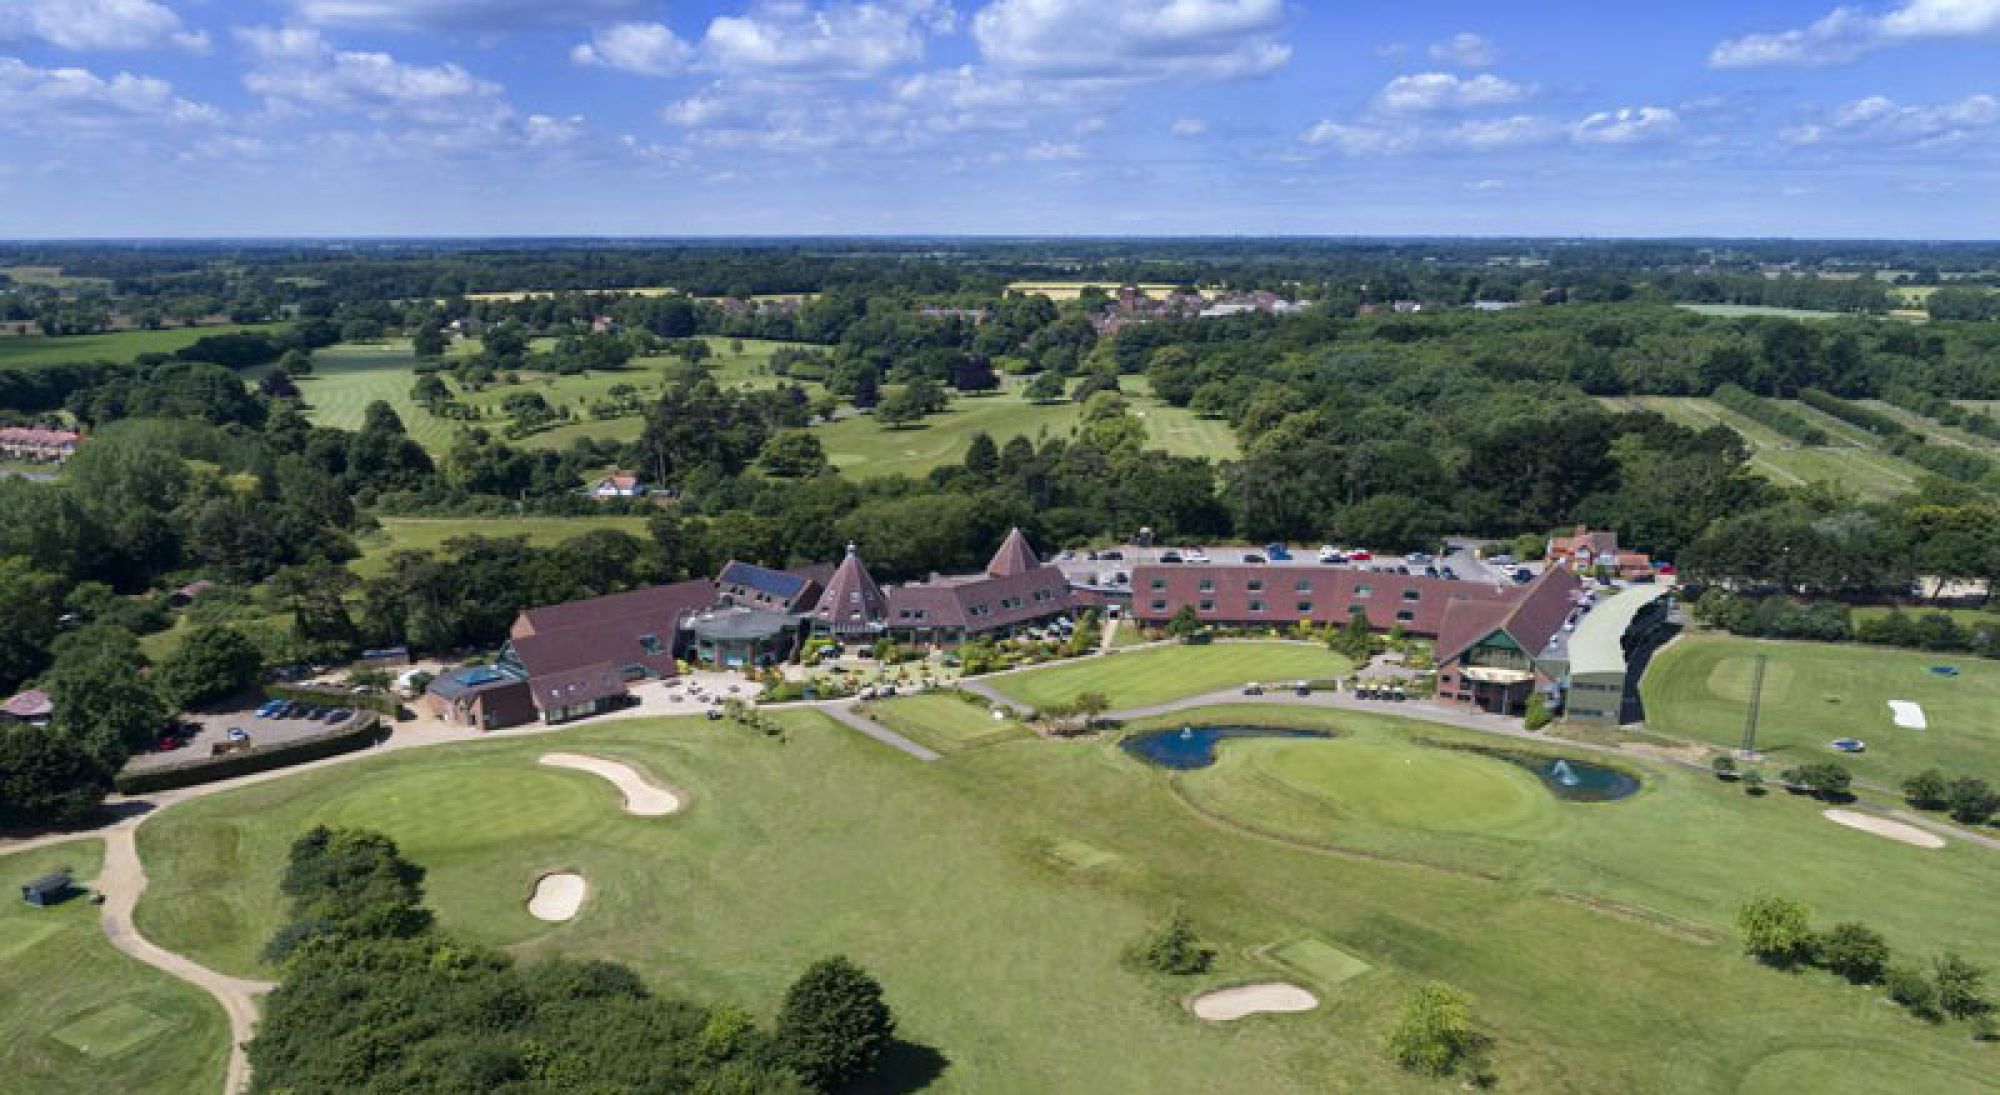 Ufford Park Woodbridge Golf includes lots of the most popular golf course around Suffolk